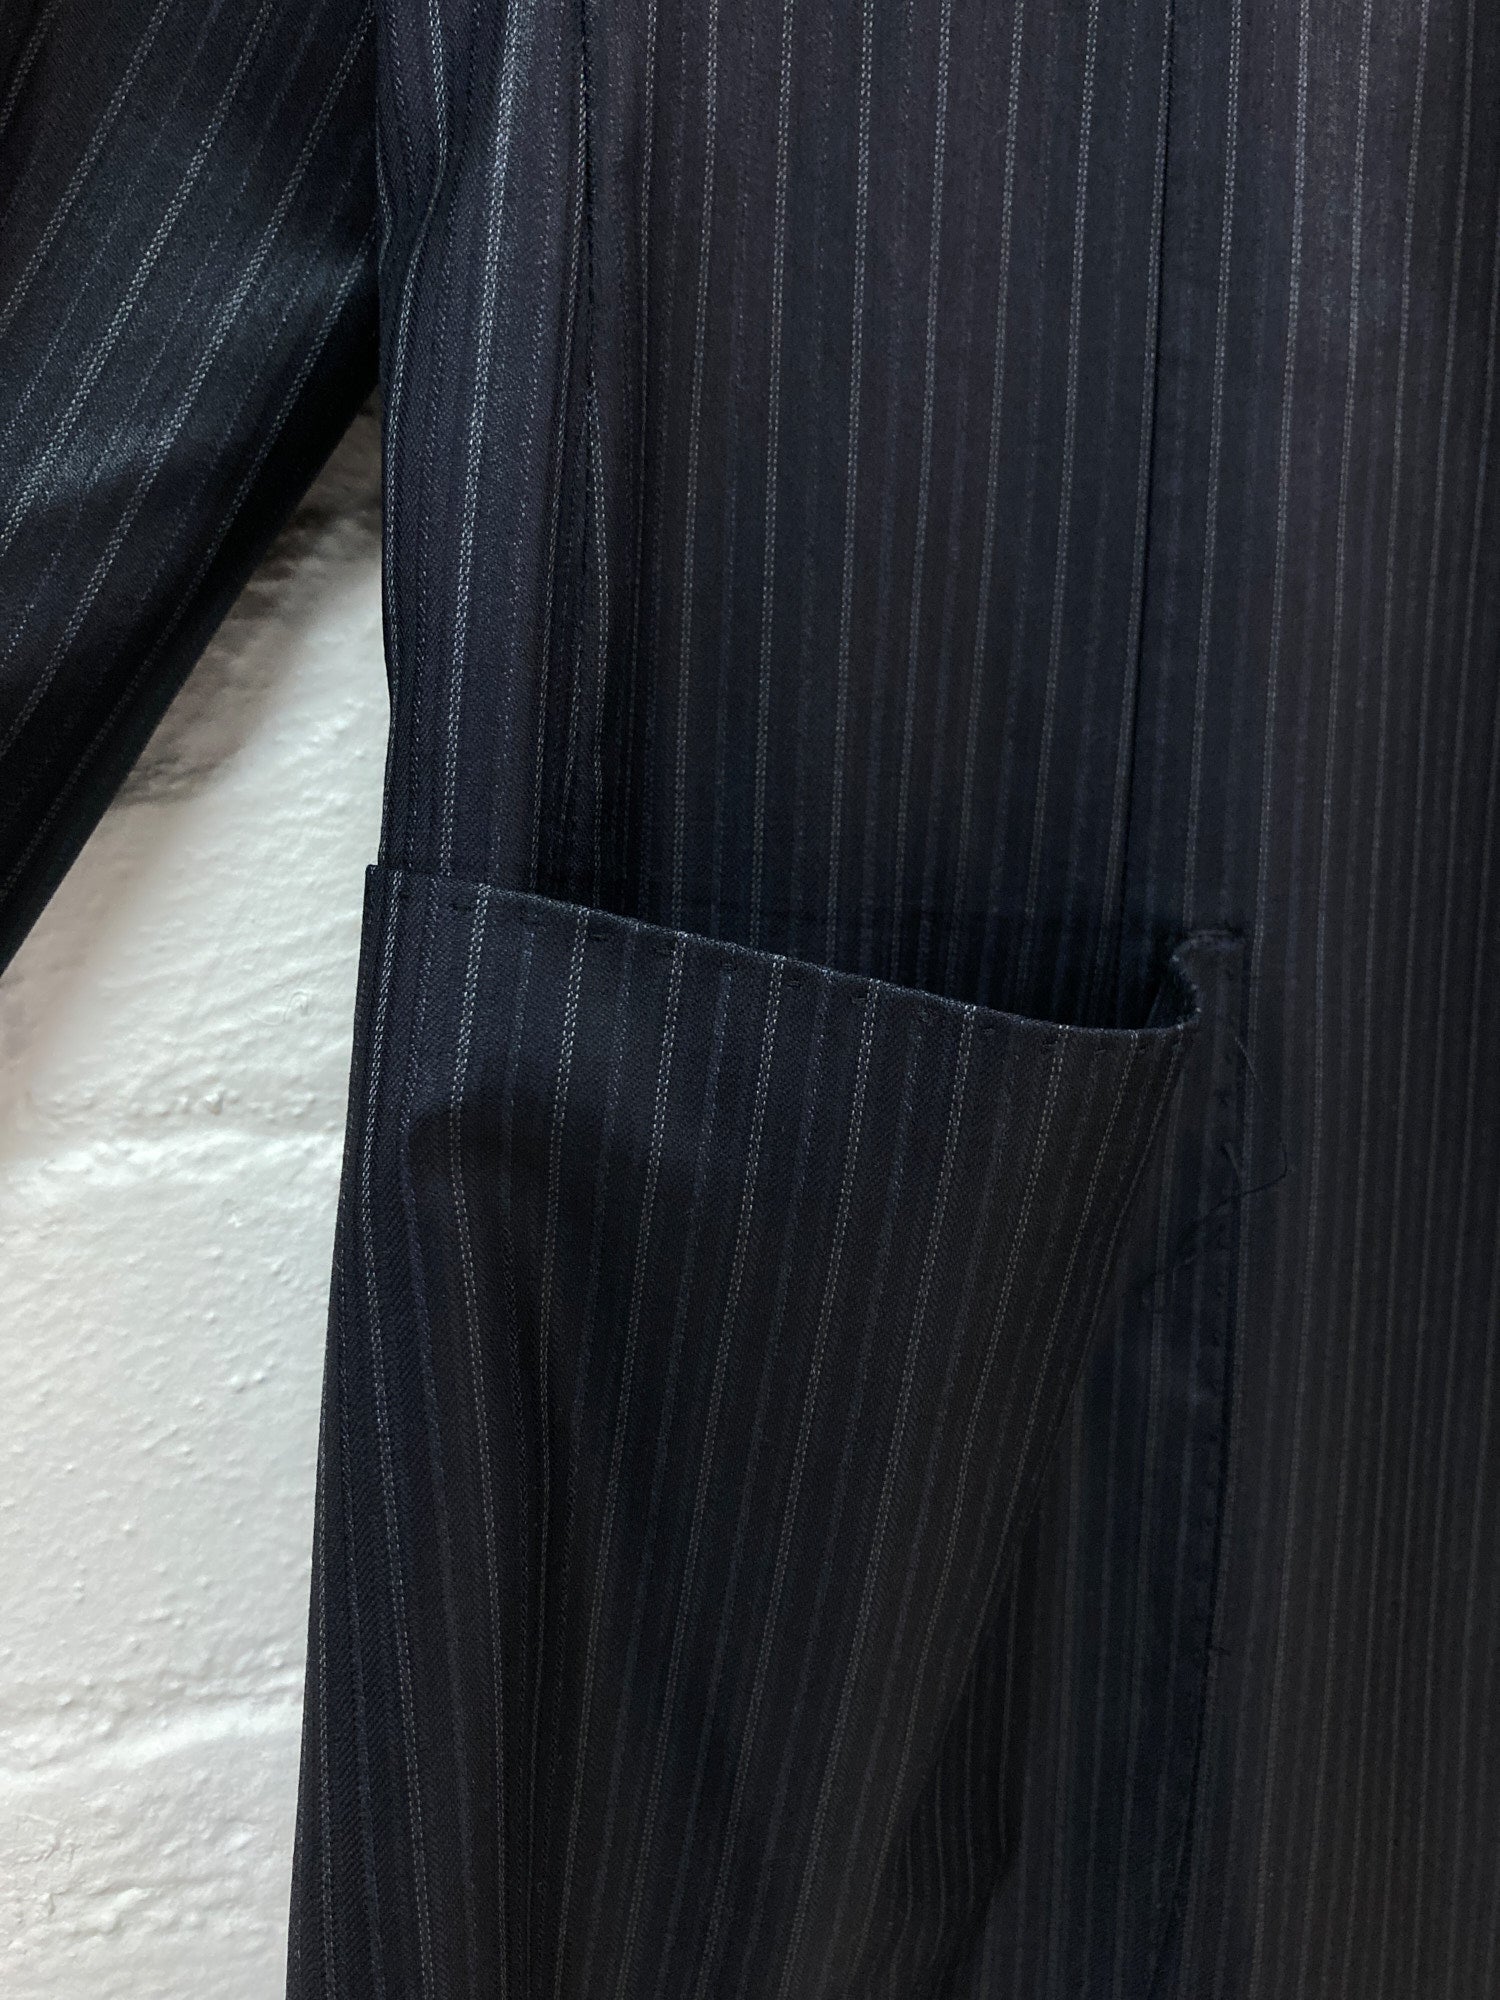 Romeo Gigli glossy striped wool two button trouser suit - mens 46 48